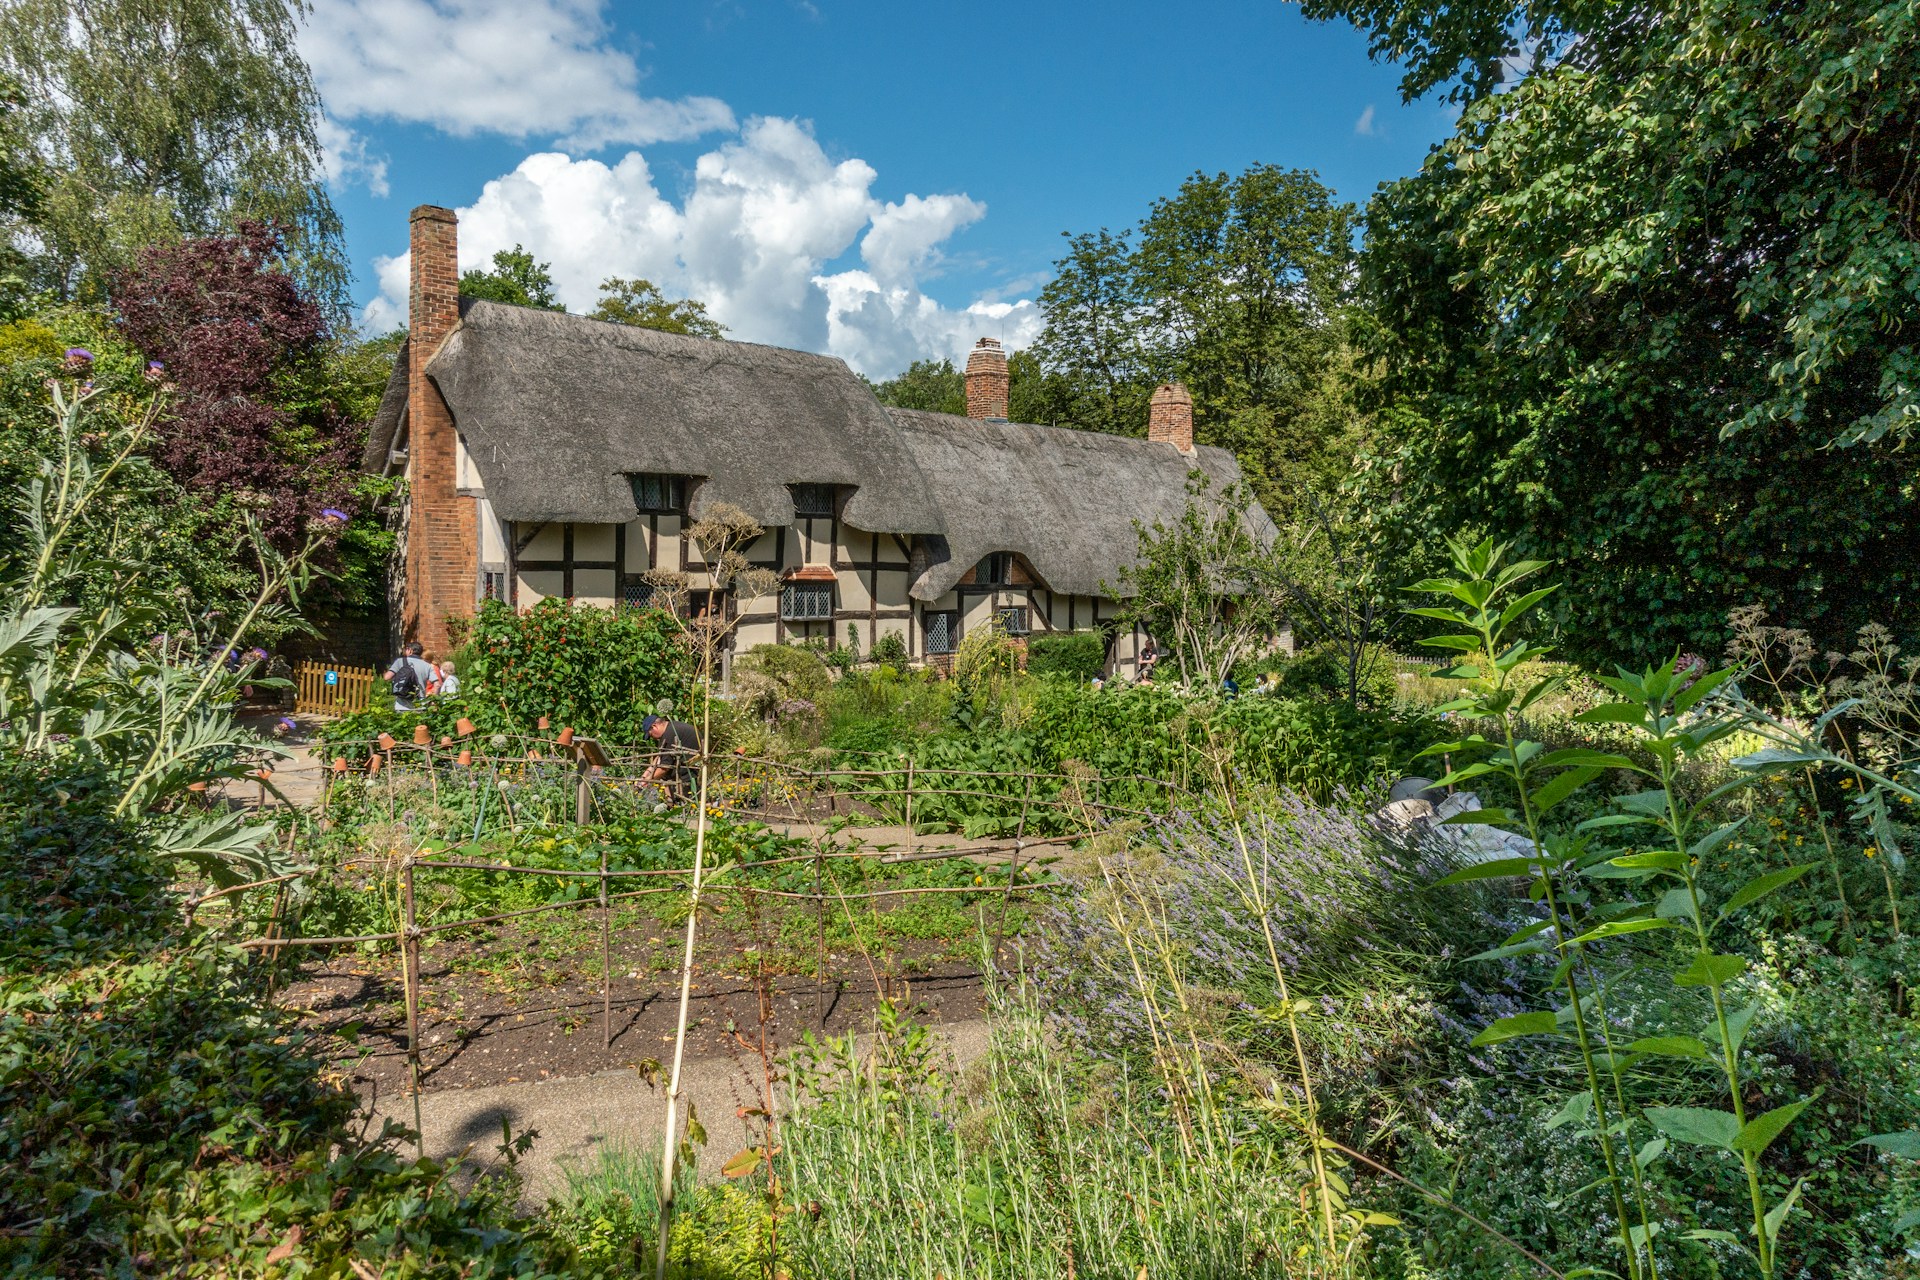 Photo of Anne Hathaway's thatched cottage in Stratford-Upon-Avon, surrounded by green gardens